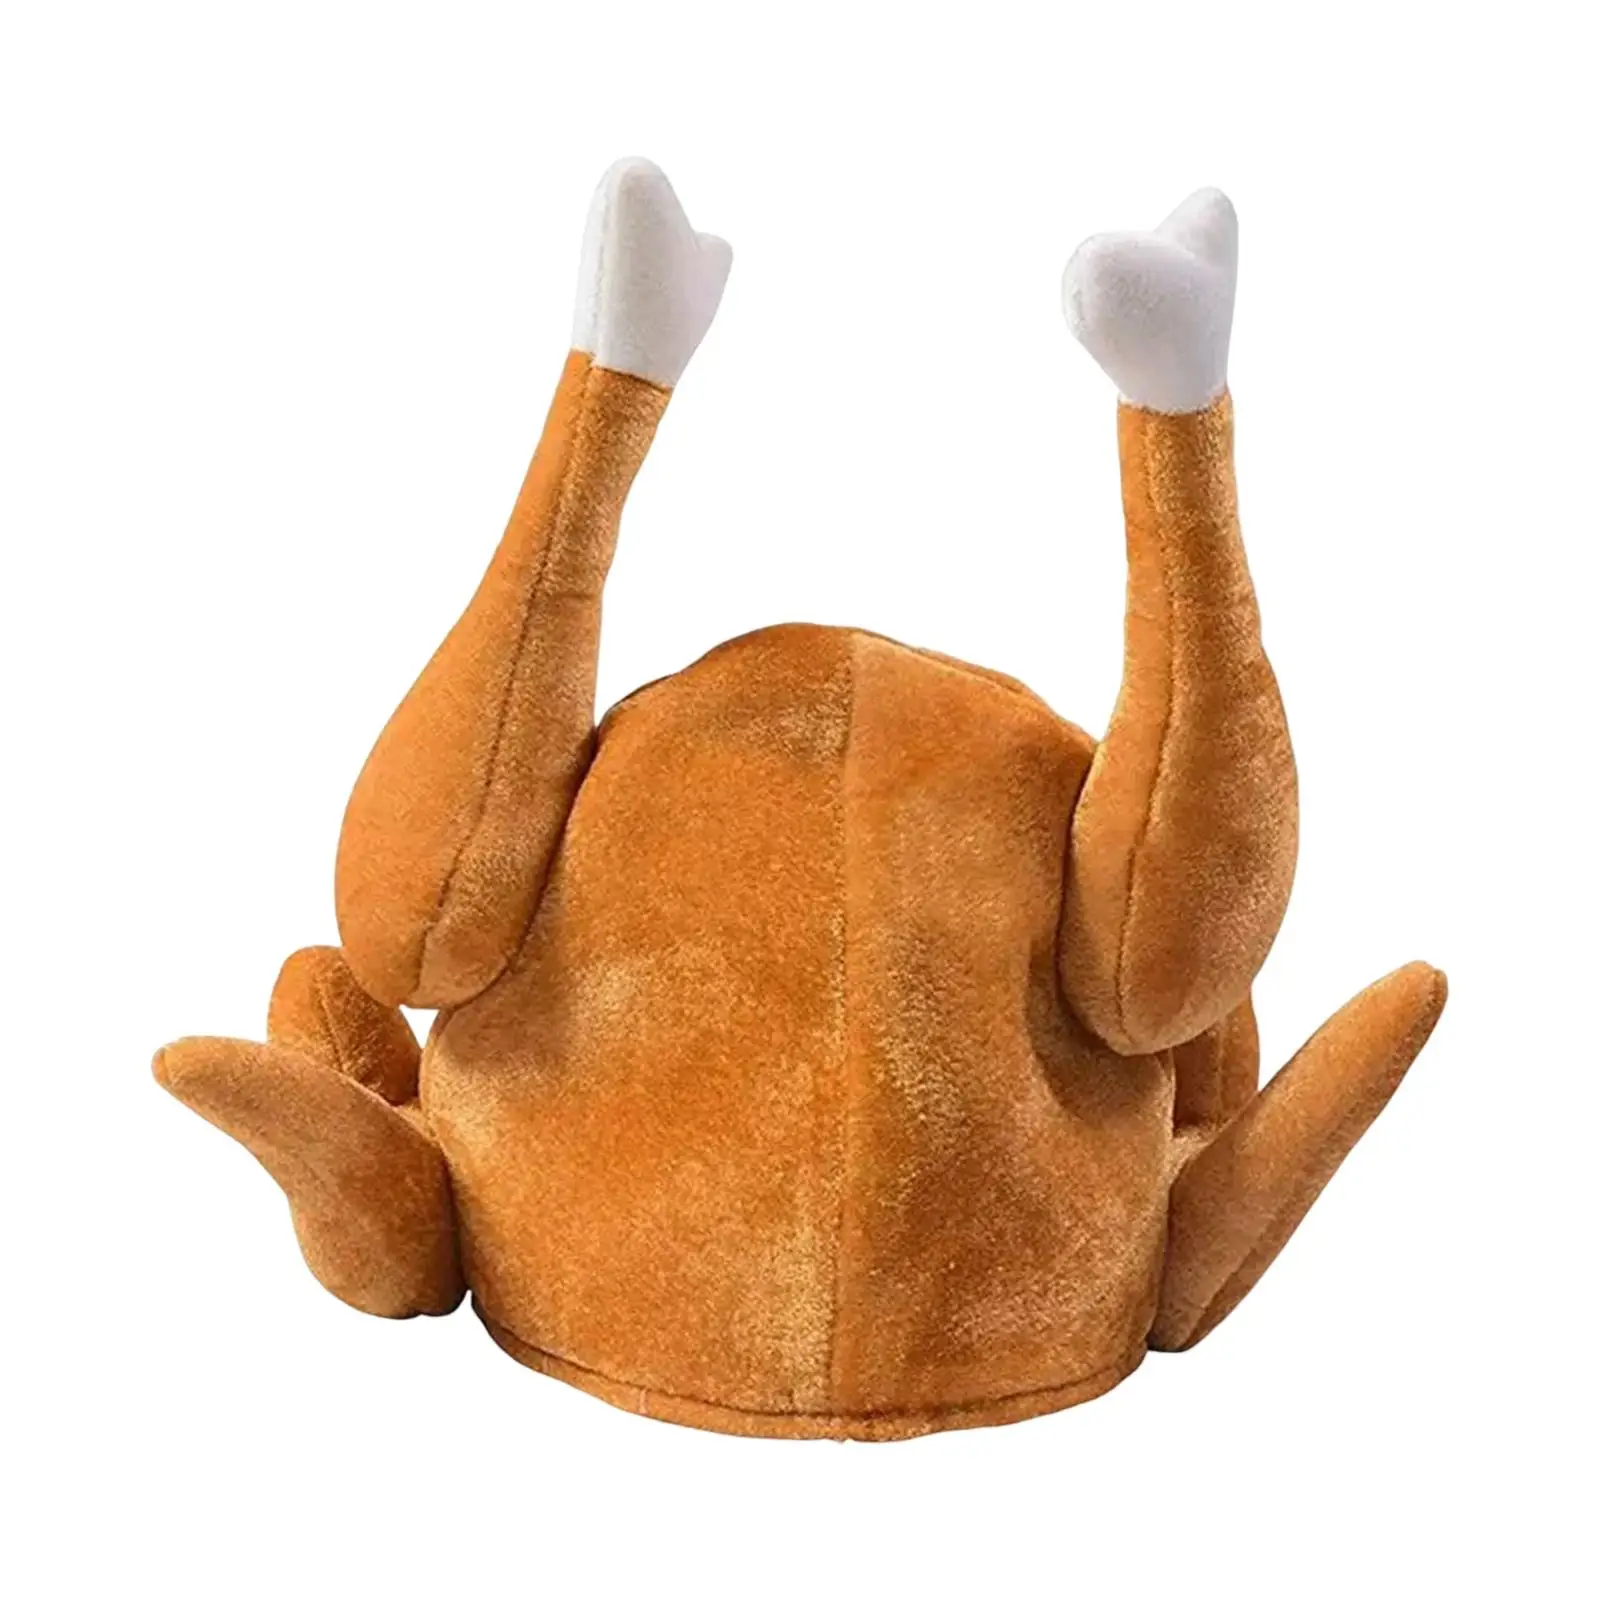 Funny Roasted Turkey Hat Cooked Chicken Costumes Accessories Creative for Dressing Props Party Xmas Stage Dressing Adult Kids